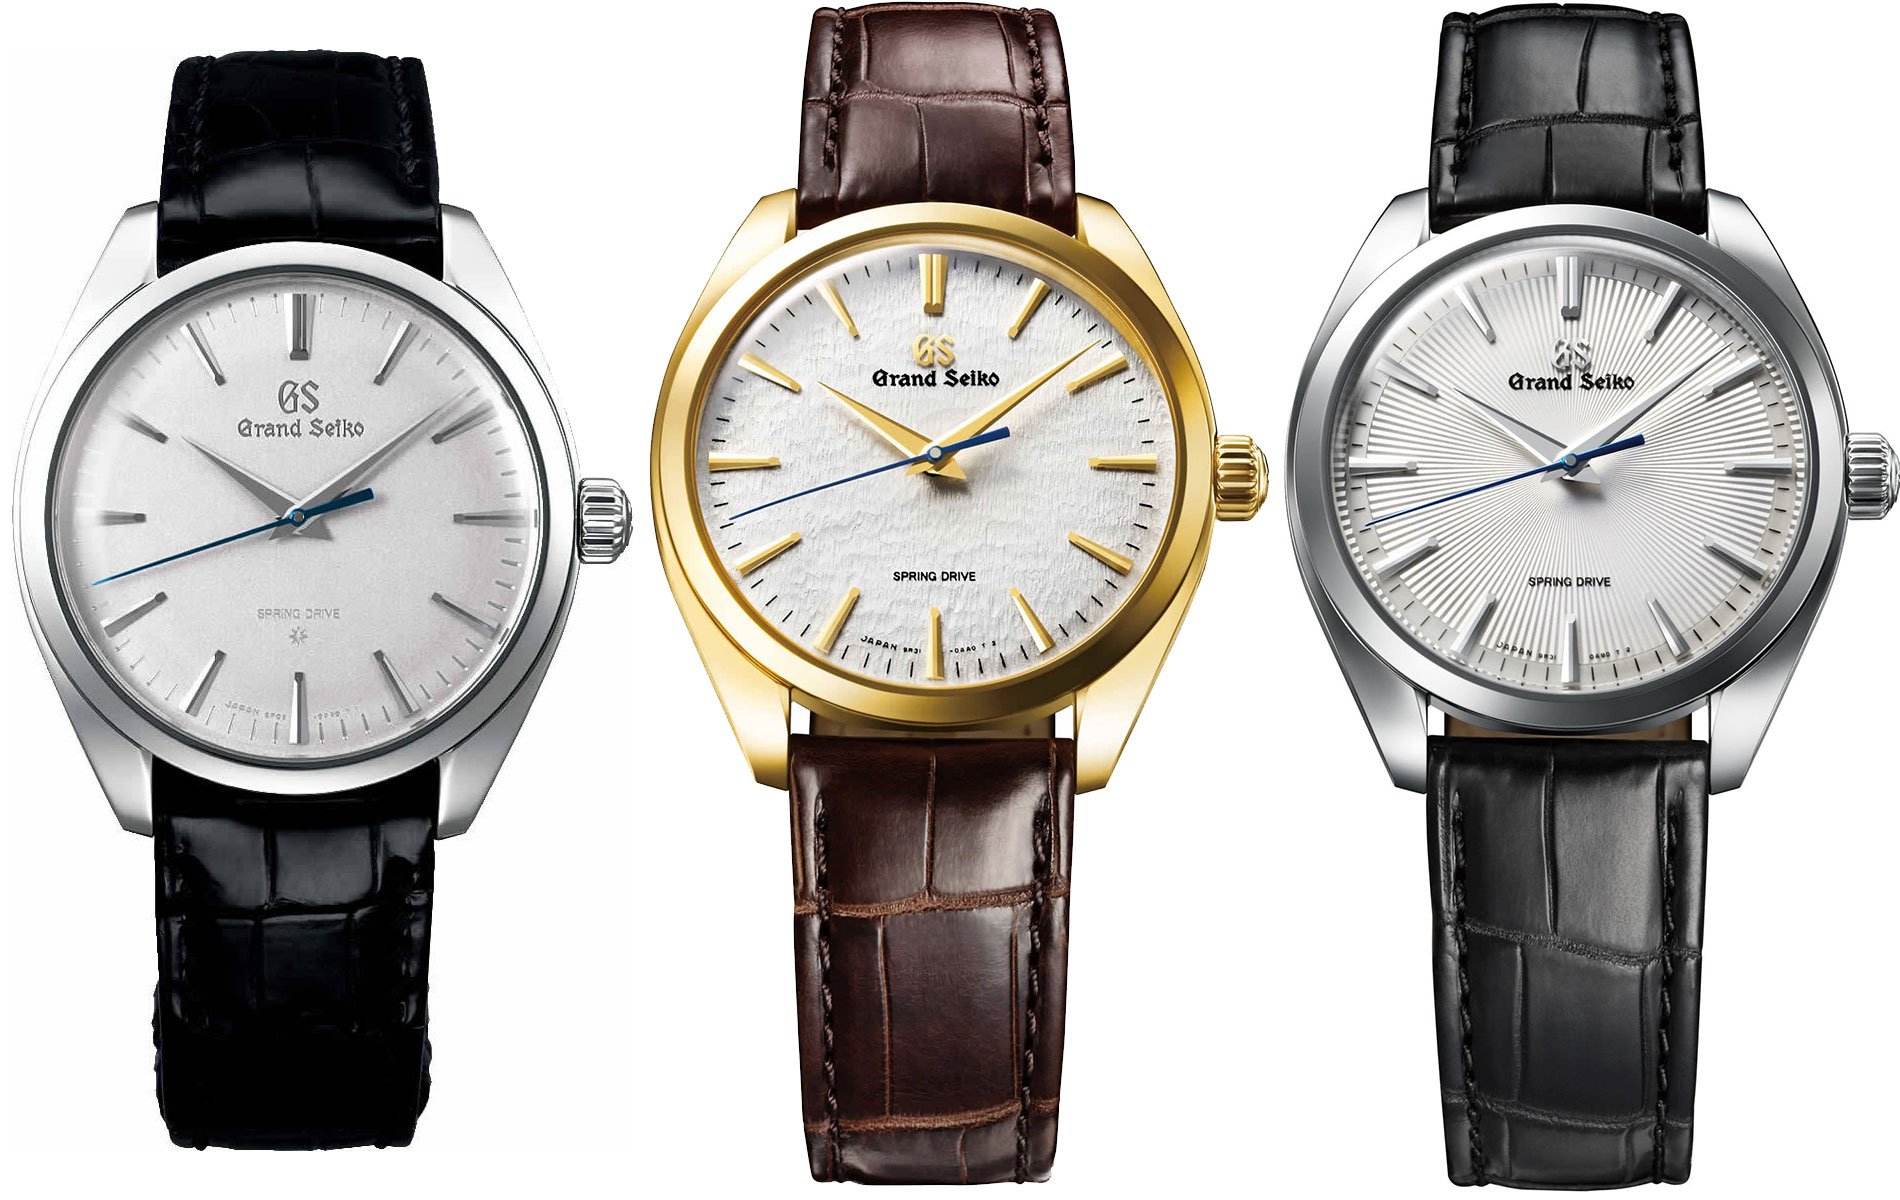 The 20th Anniversary of Spring Drive is Marked with a New Manual-Winding Thin Dress Series